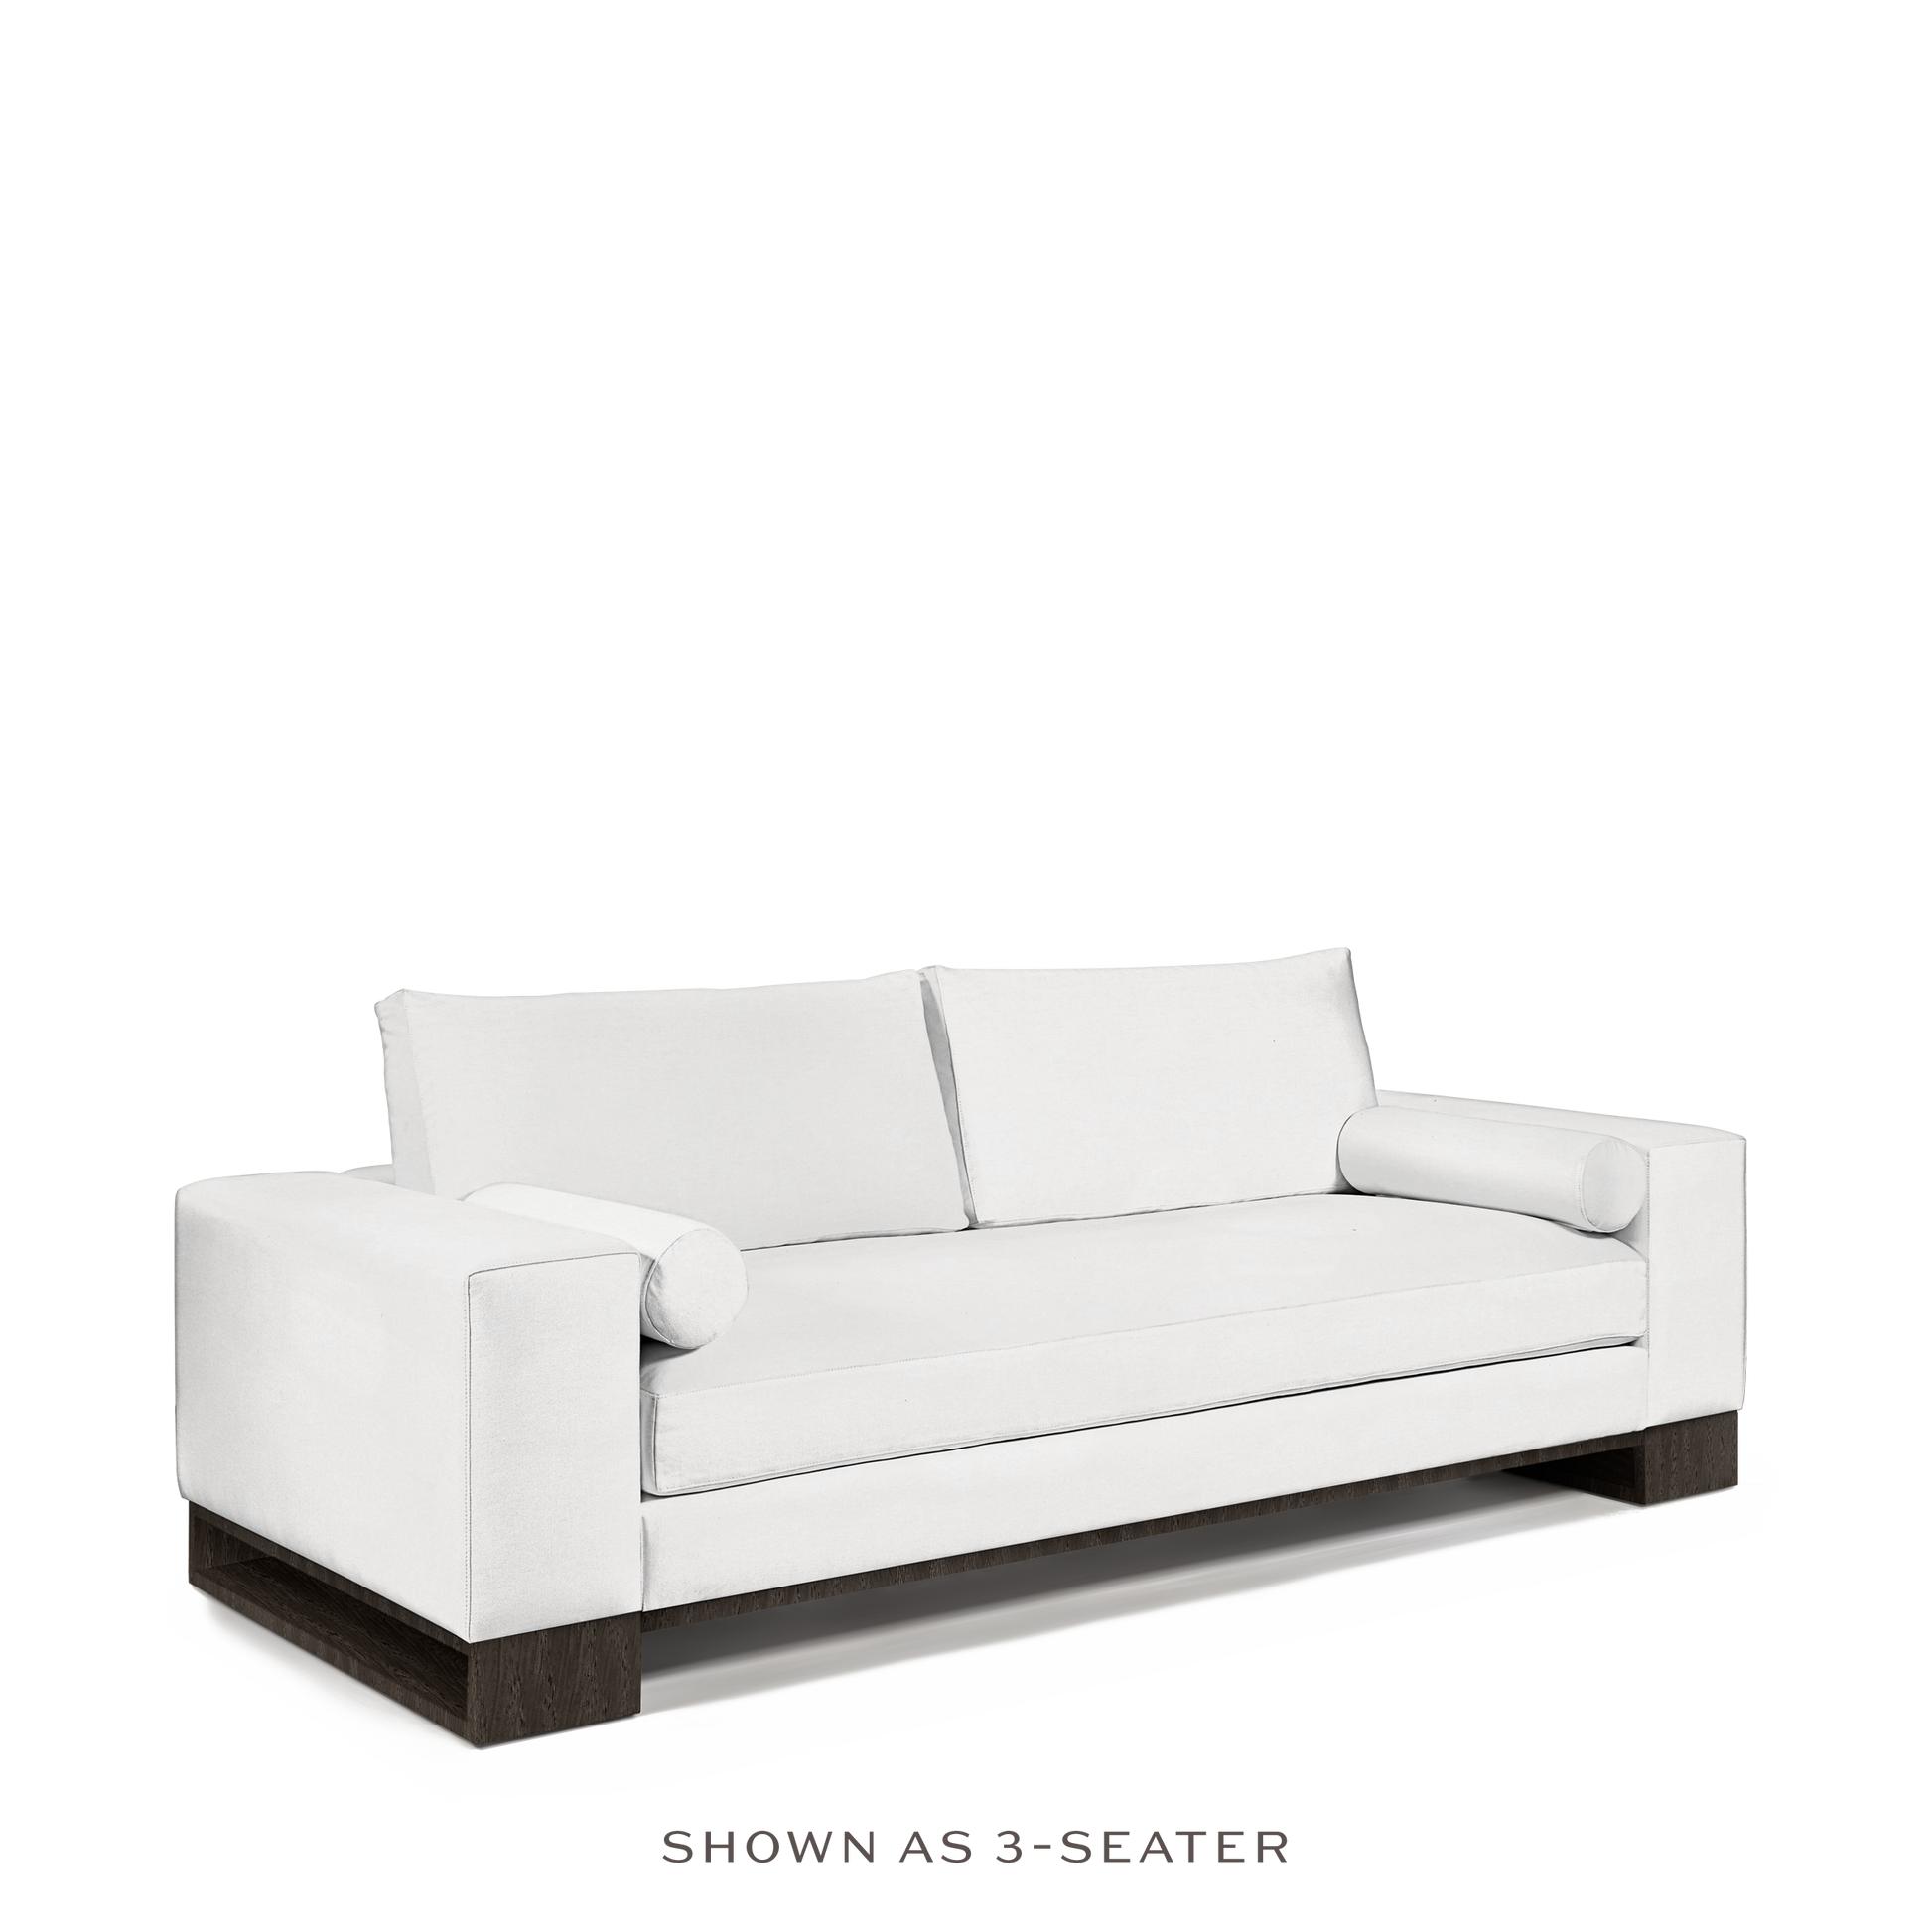 TERRA 2-seater sofa with white textile and dark grey wood legs 